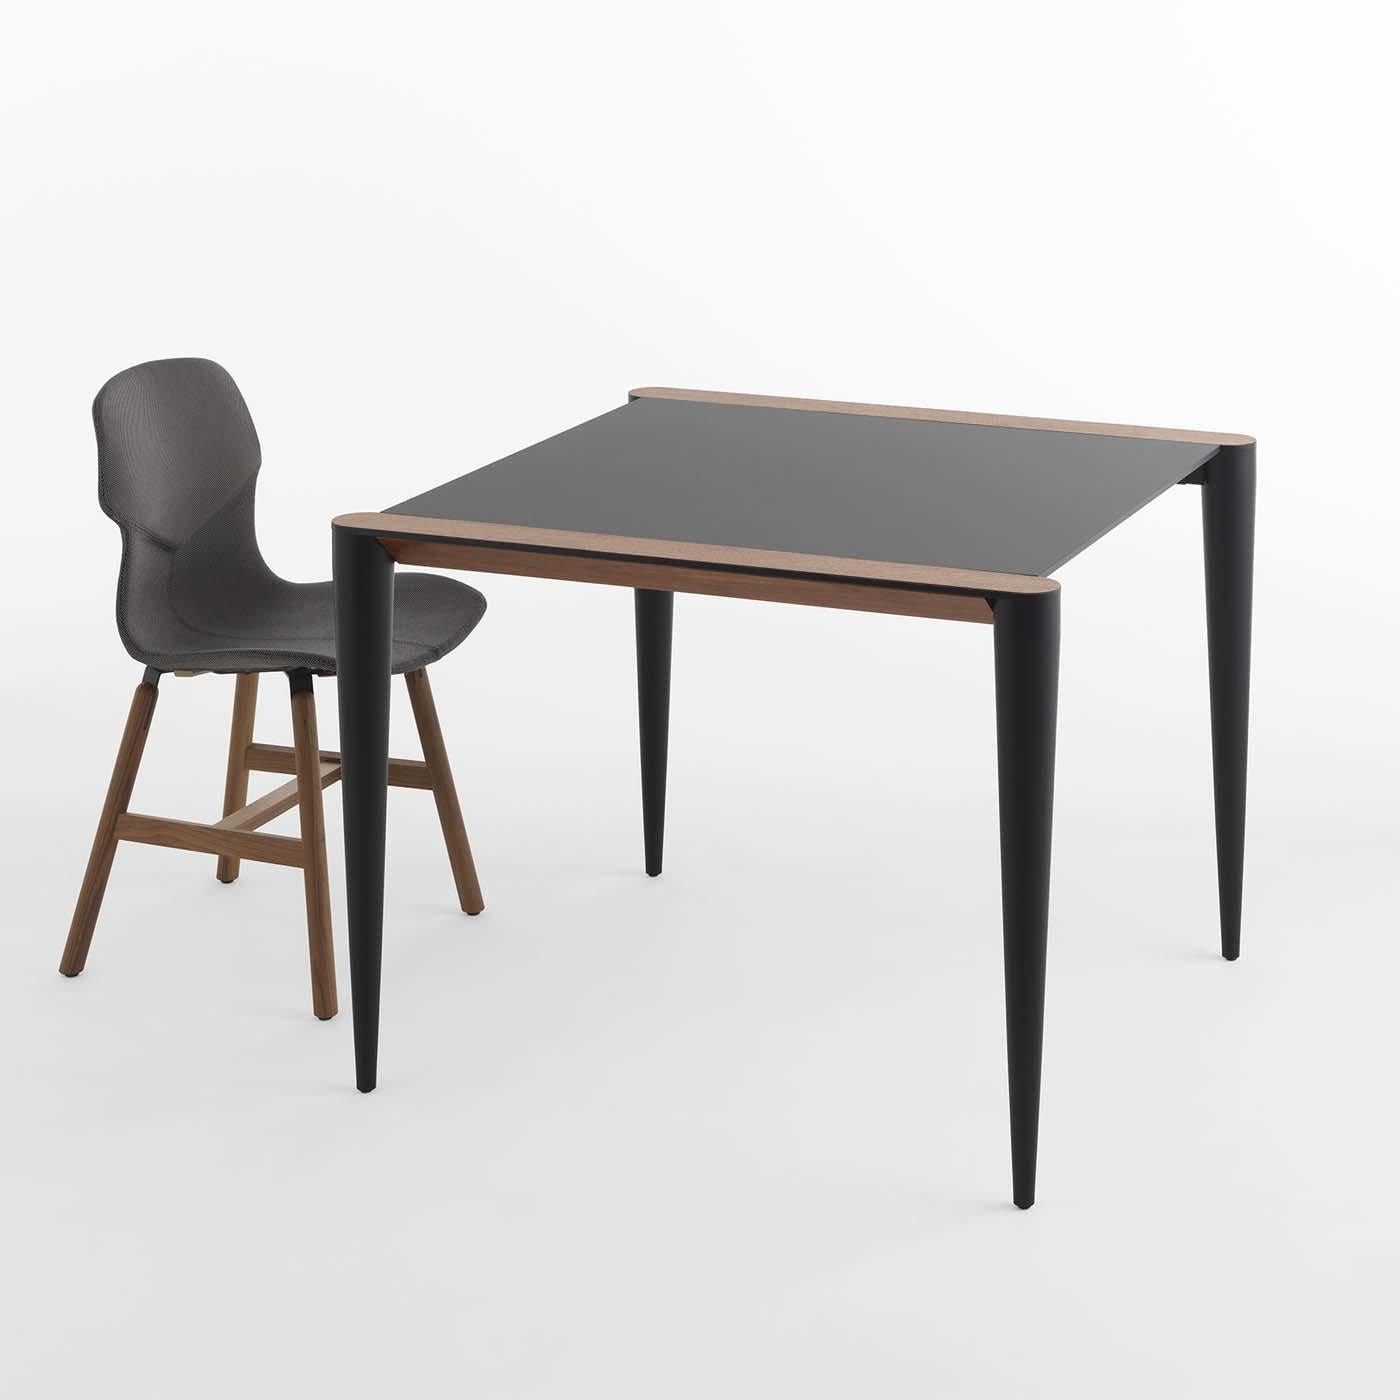 Resting on black-lacquered aluminum conical legs, this bistrot table is characterized by a distinctive top made of Fenix, a new material created with nanotechnology that renders the surface anti-fingerprint, resistant to scratch and suitable for